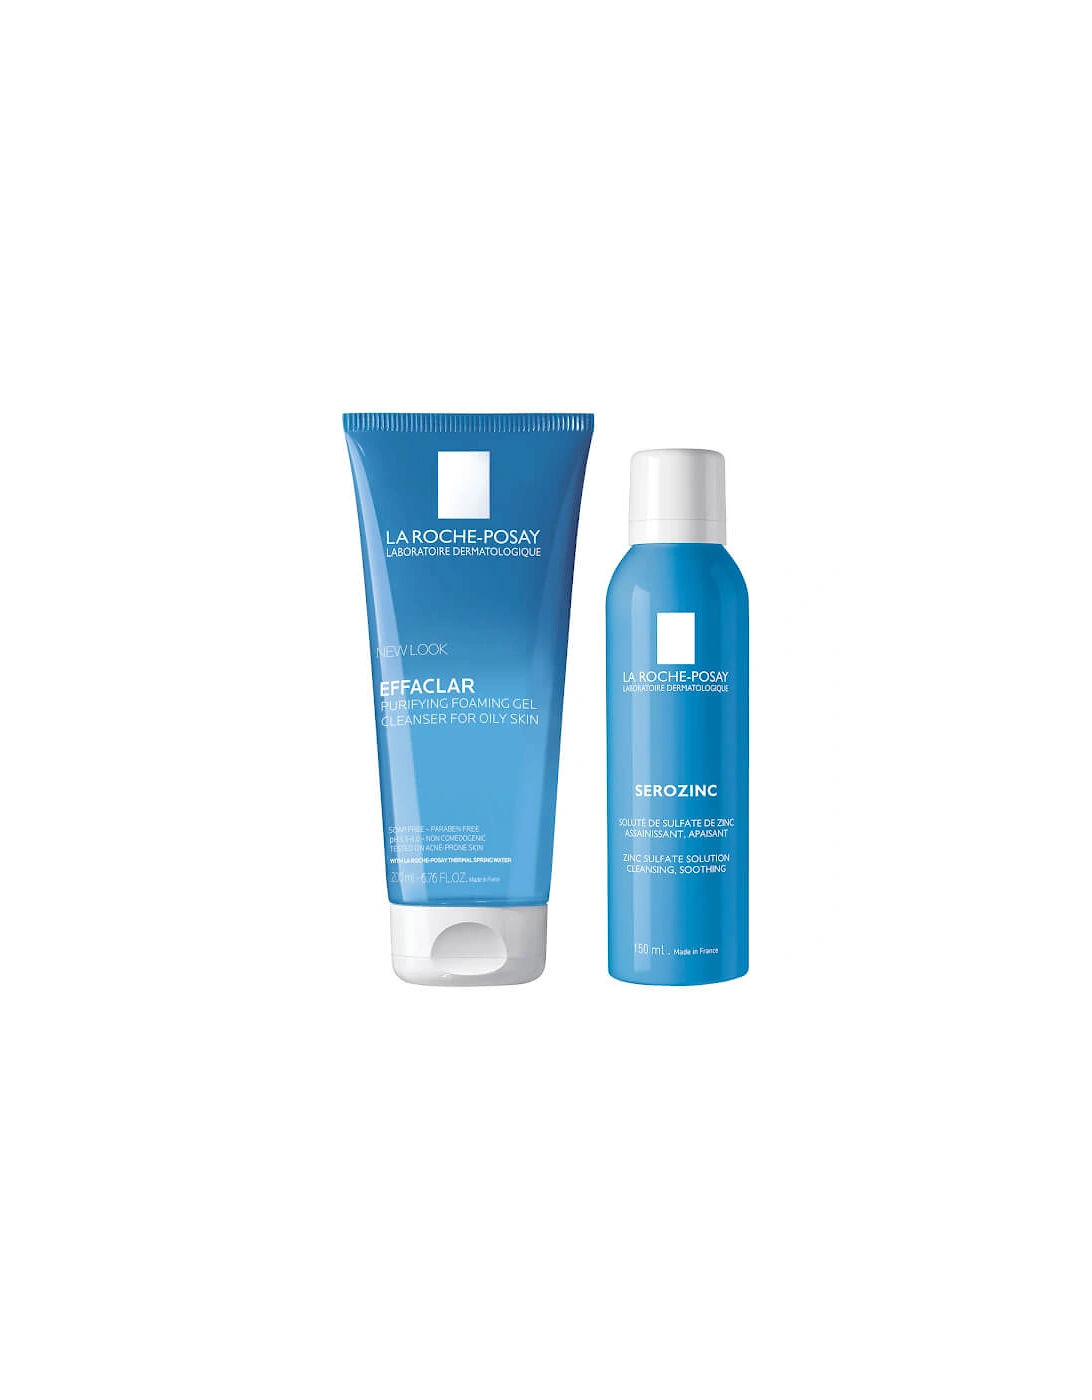 La Roche-Posay Men's Skincare Cleanse and Post Shave Care Duo, 2 of 1